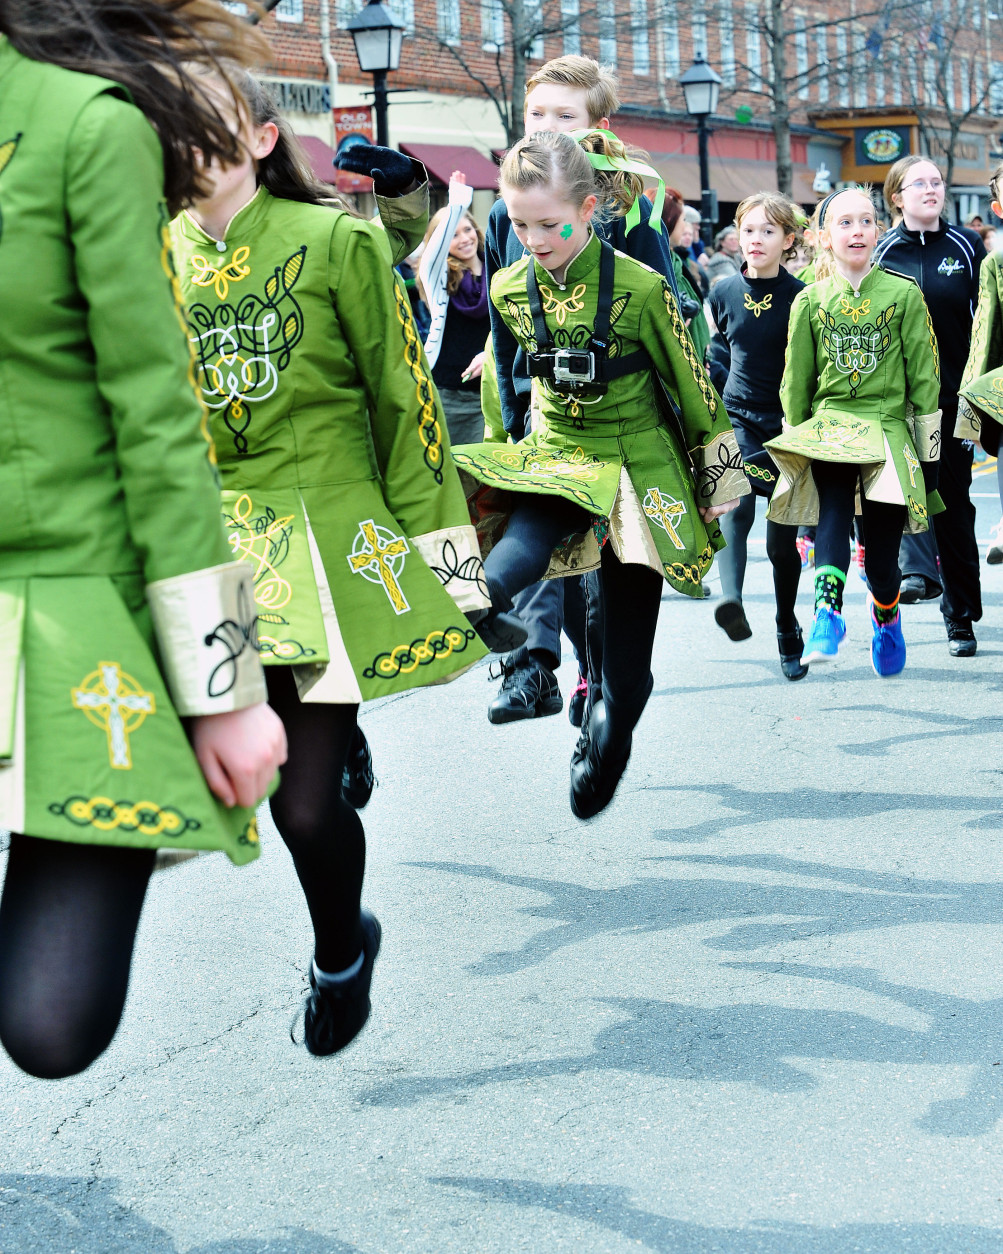 Boyle School of Irish Dance Members perform at the Ballyshaners Annual Old Town Alexandria Saint Patrick’s Day Parade on Saturday, March 5, 2016. (Photo Shannon Finney/Shannon Finney Photography)